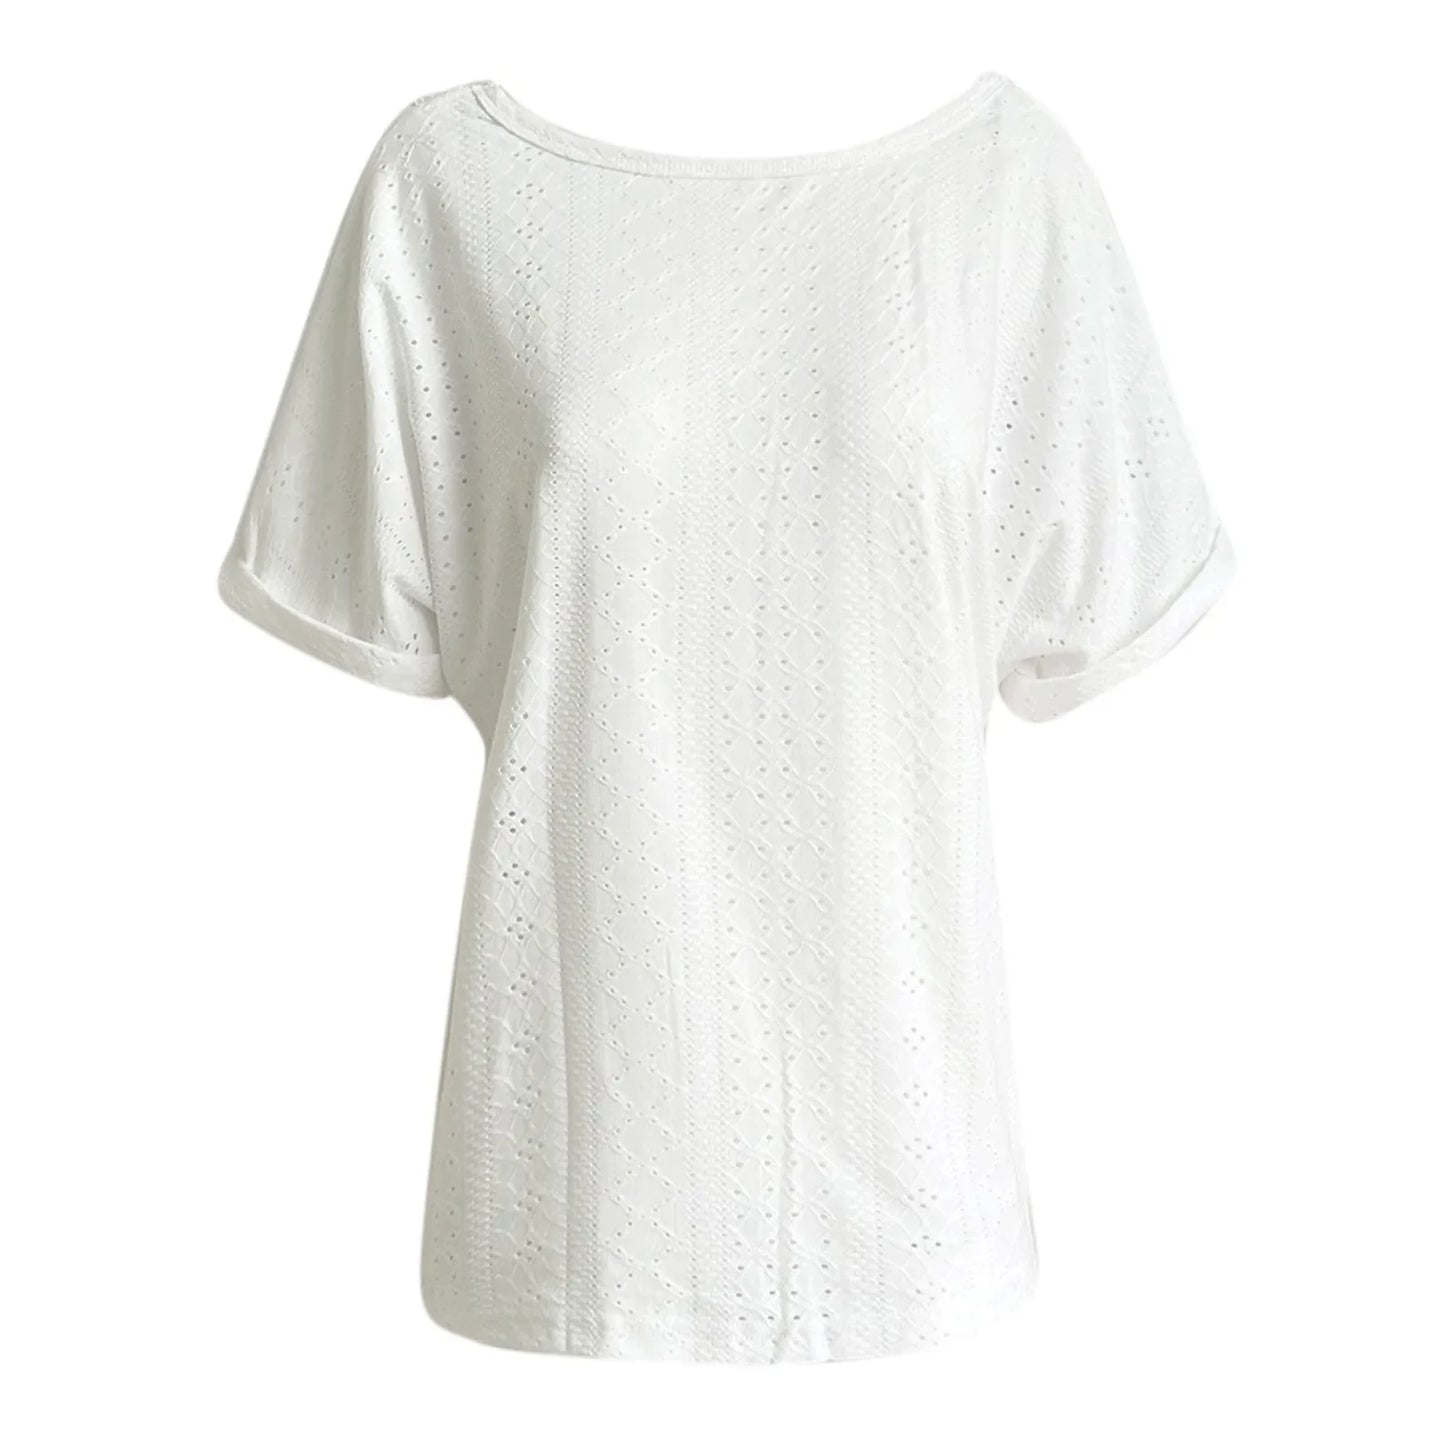 Casual Tops- Women's Eyelet Blouse with Embroidered Lace Back- - Pekosa Women Fashion